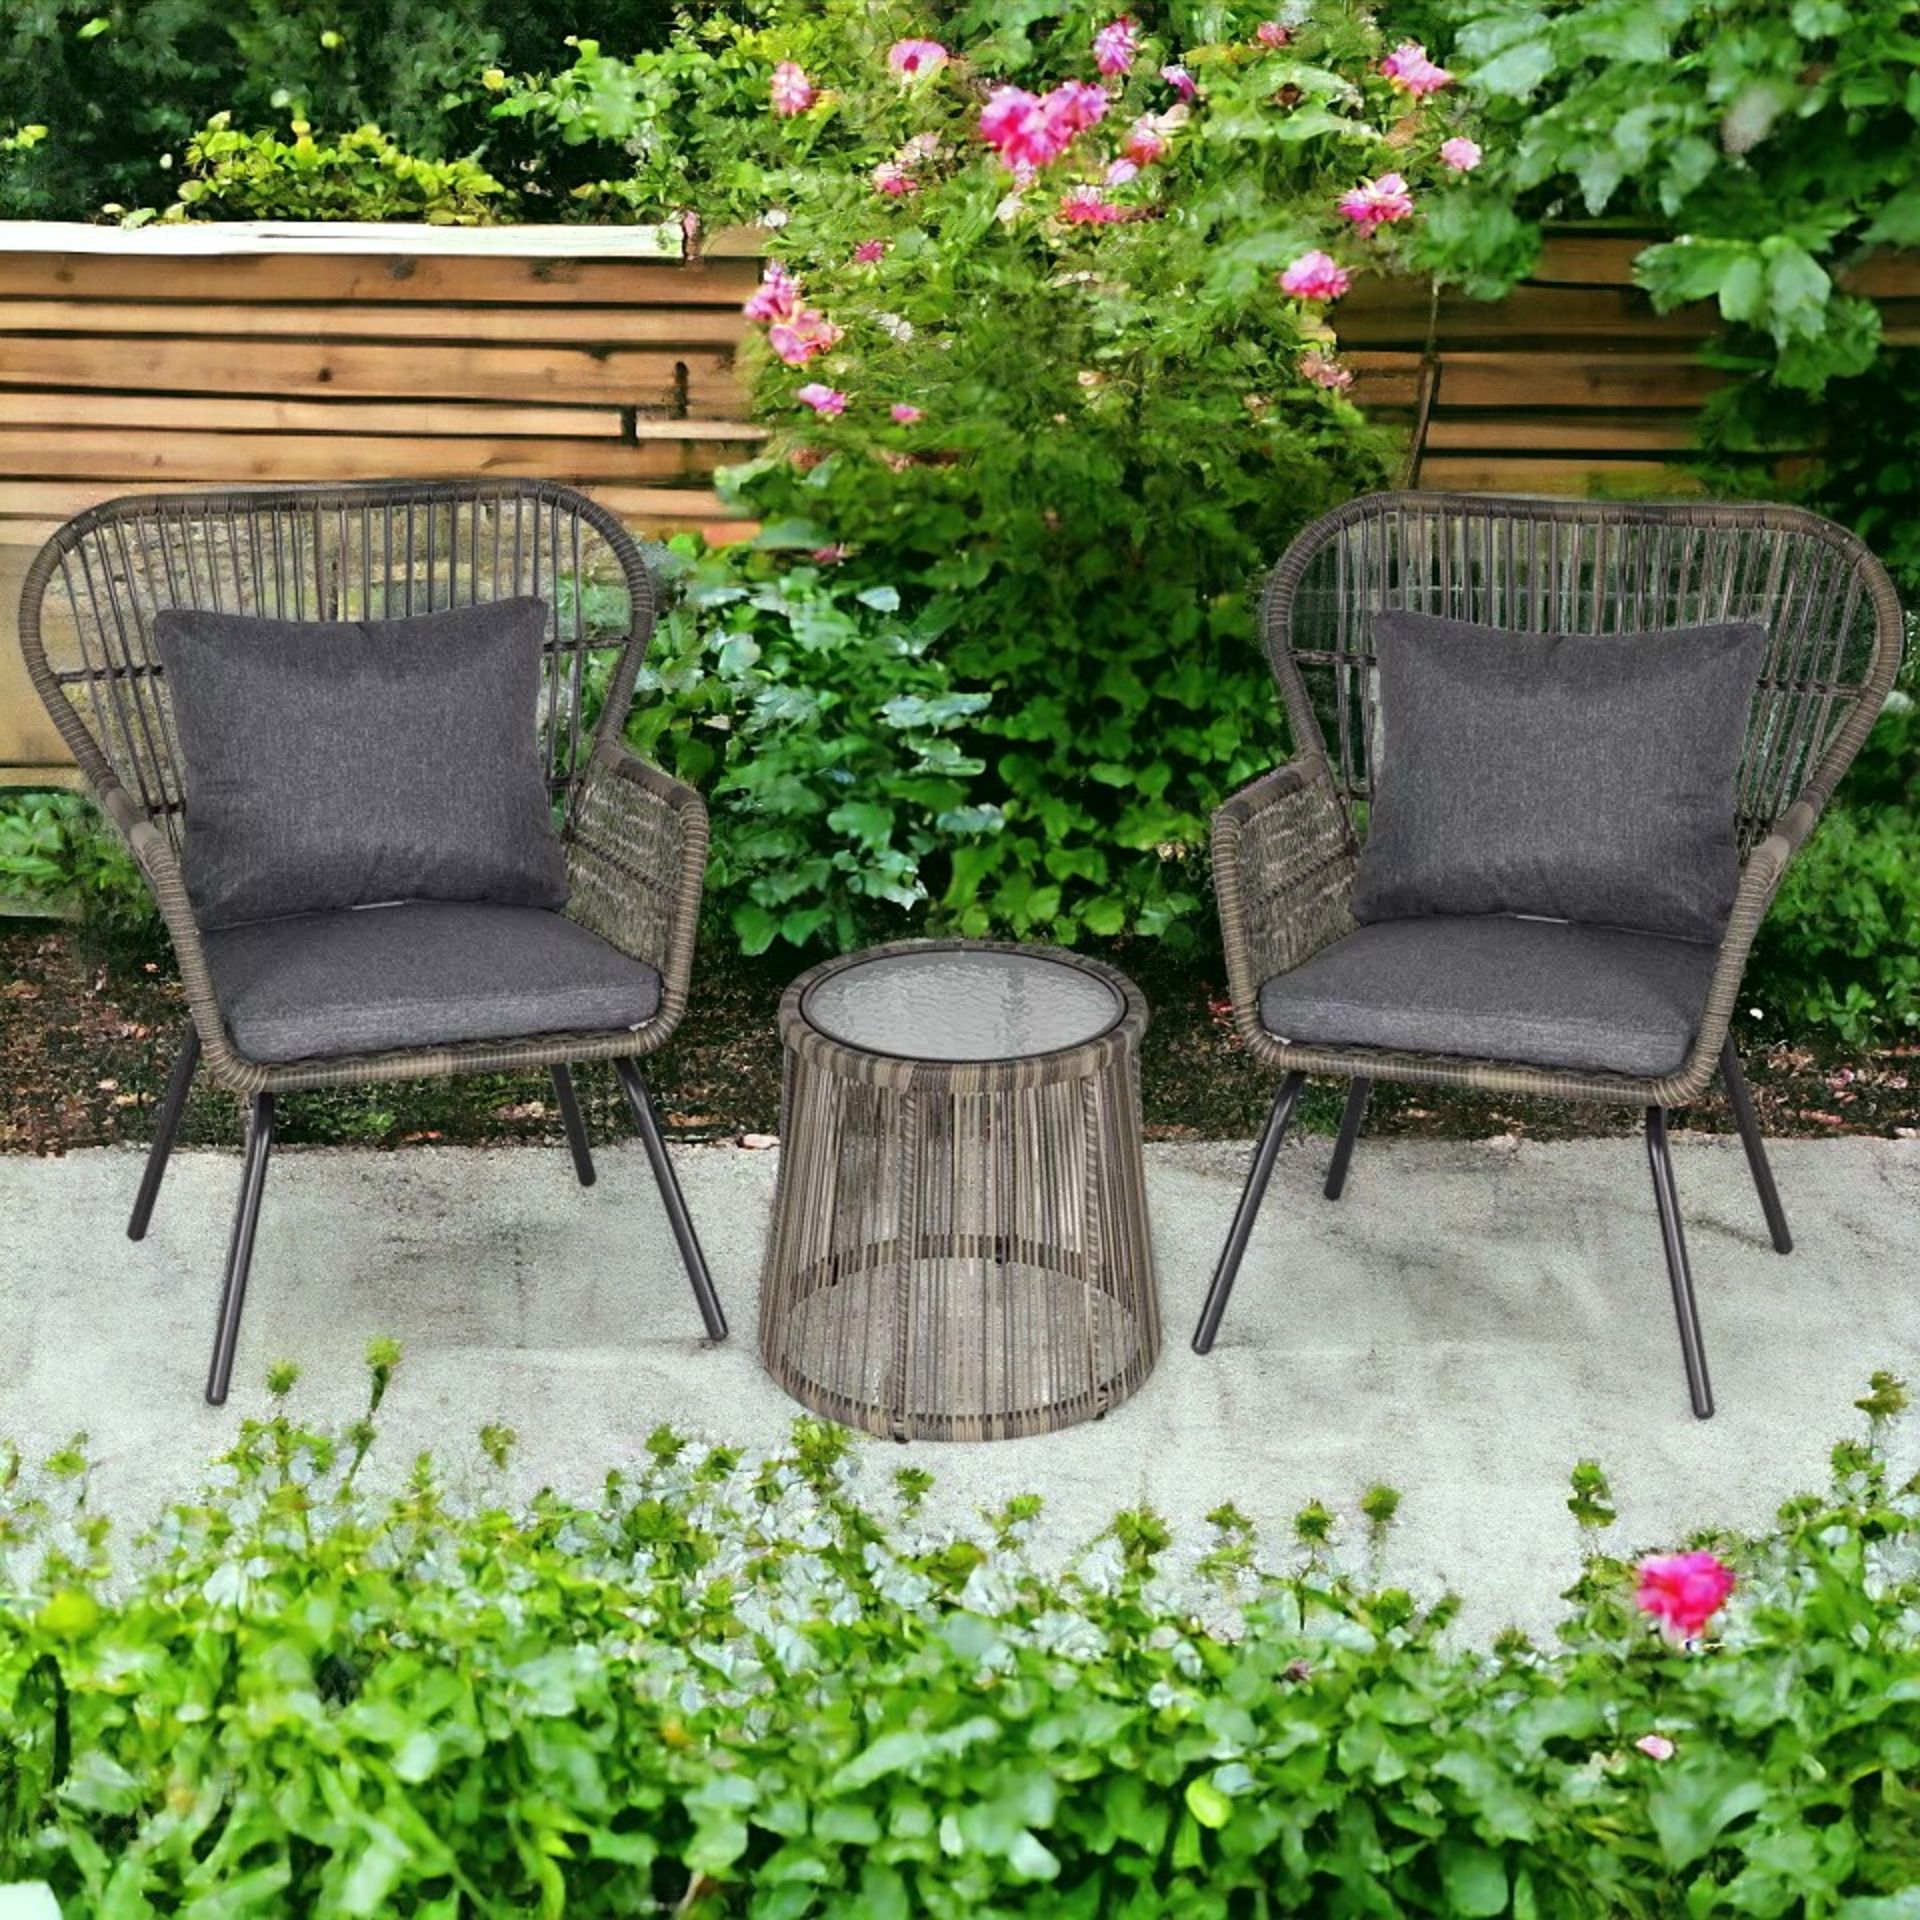 FREE DELIVERY -BRAND NEW 3 PCS WEBBED PE RATTAN OUTDOOR PATIO SET W/ CUSHIONS STEEL FRAME GREY